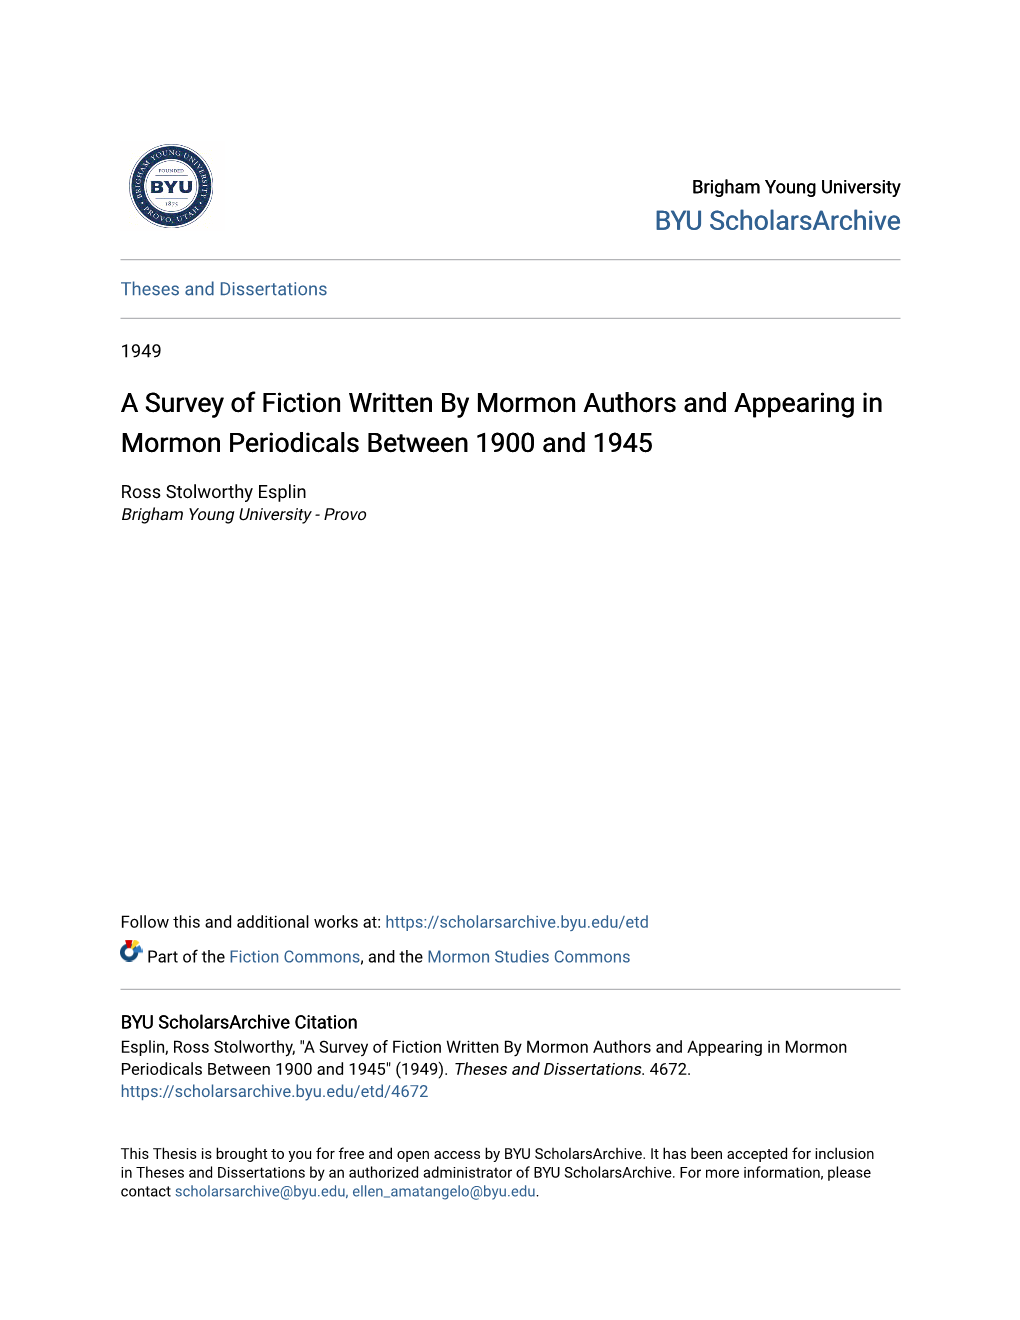 A Survey of Fiction Written by Mormon Authors and Appearing in Mormon Periodicals Between 1900 and 1945